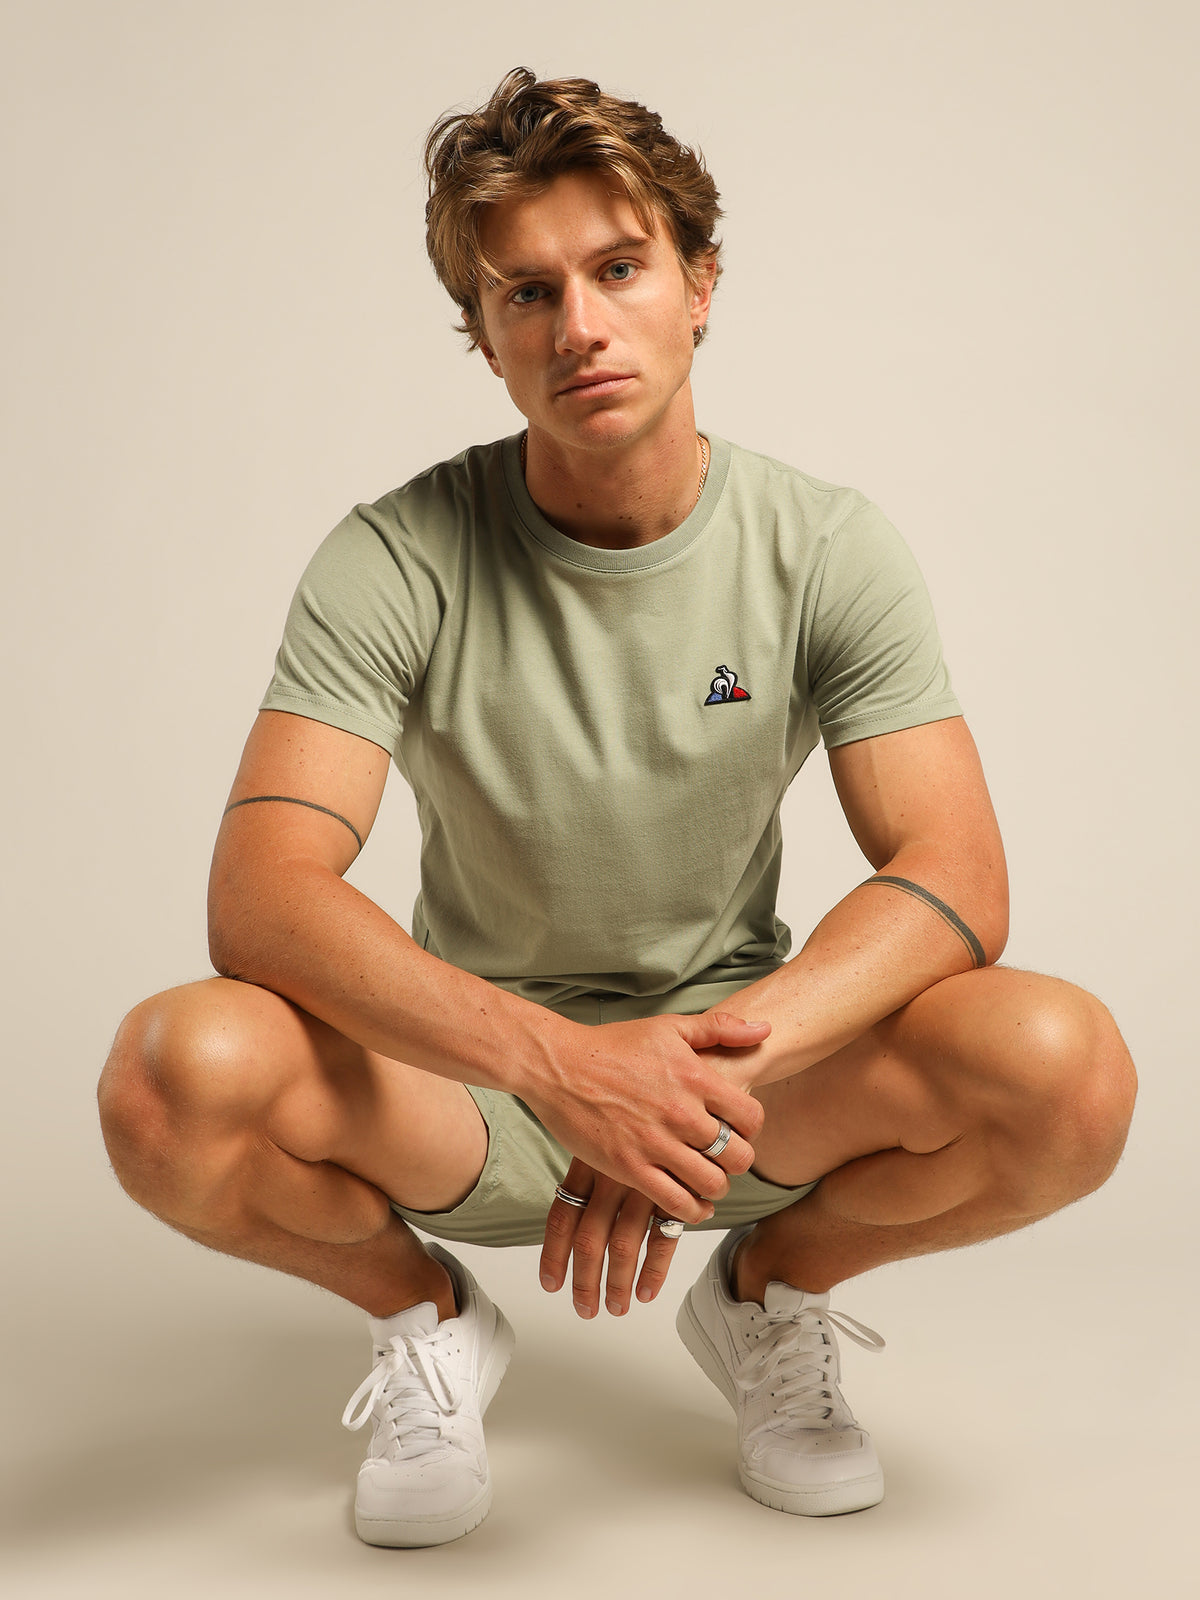 Victor T-Shirt in Sage